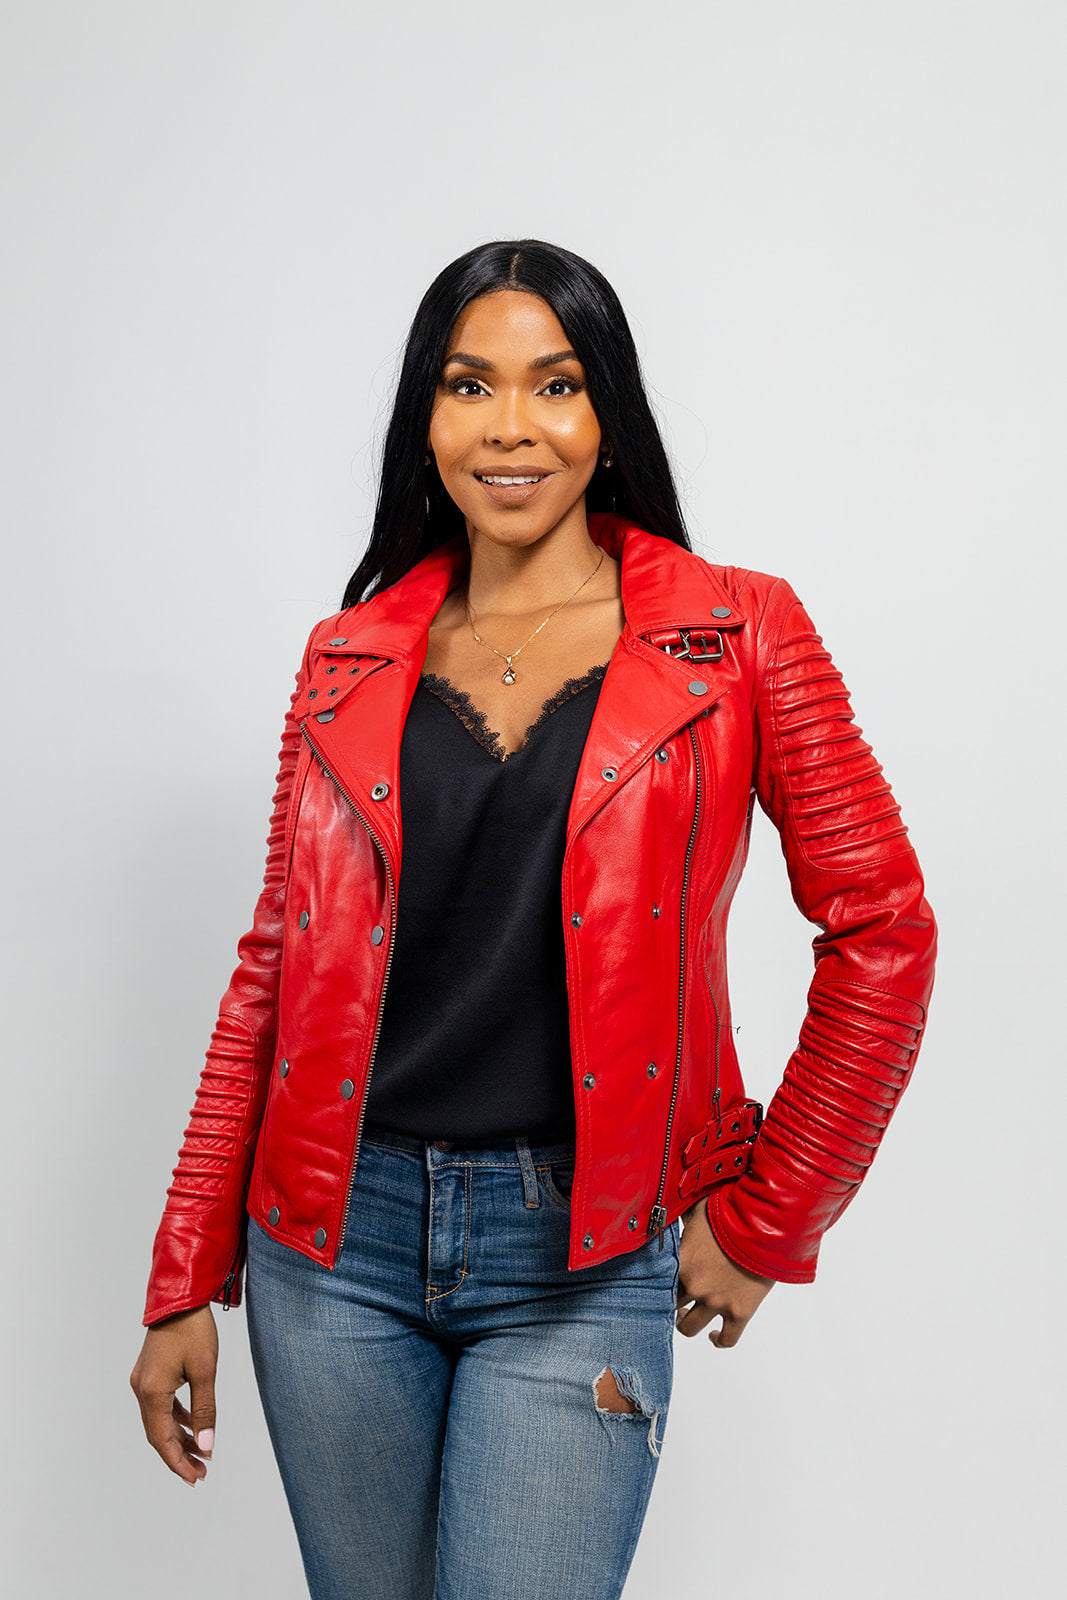 Queens Women's Fashion Leather Jacket Fire Red (POS) Women's Fashion Moto Leather Jacket Whet Blu NYC   